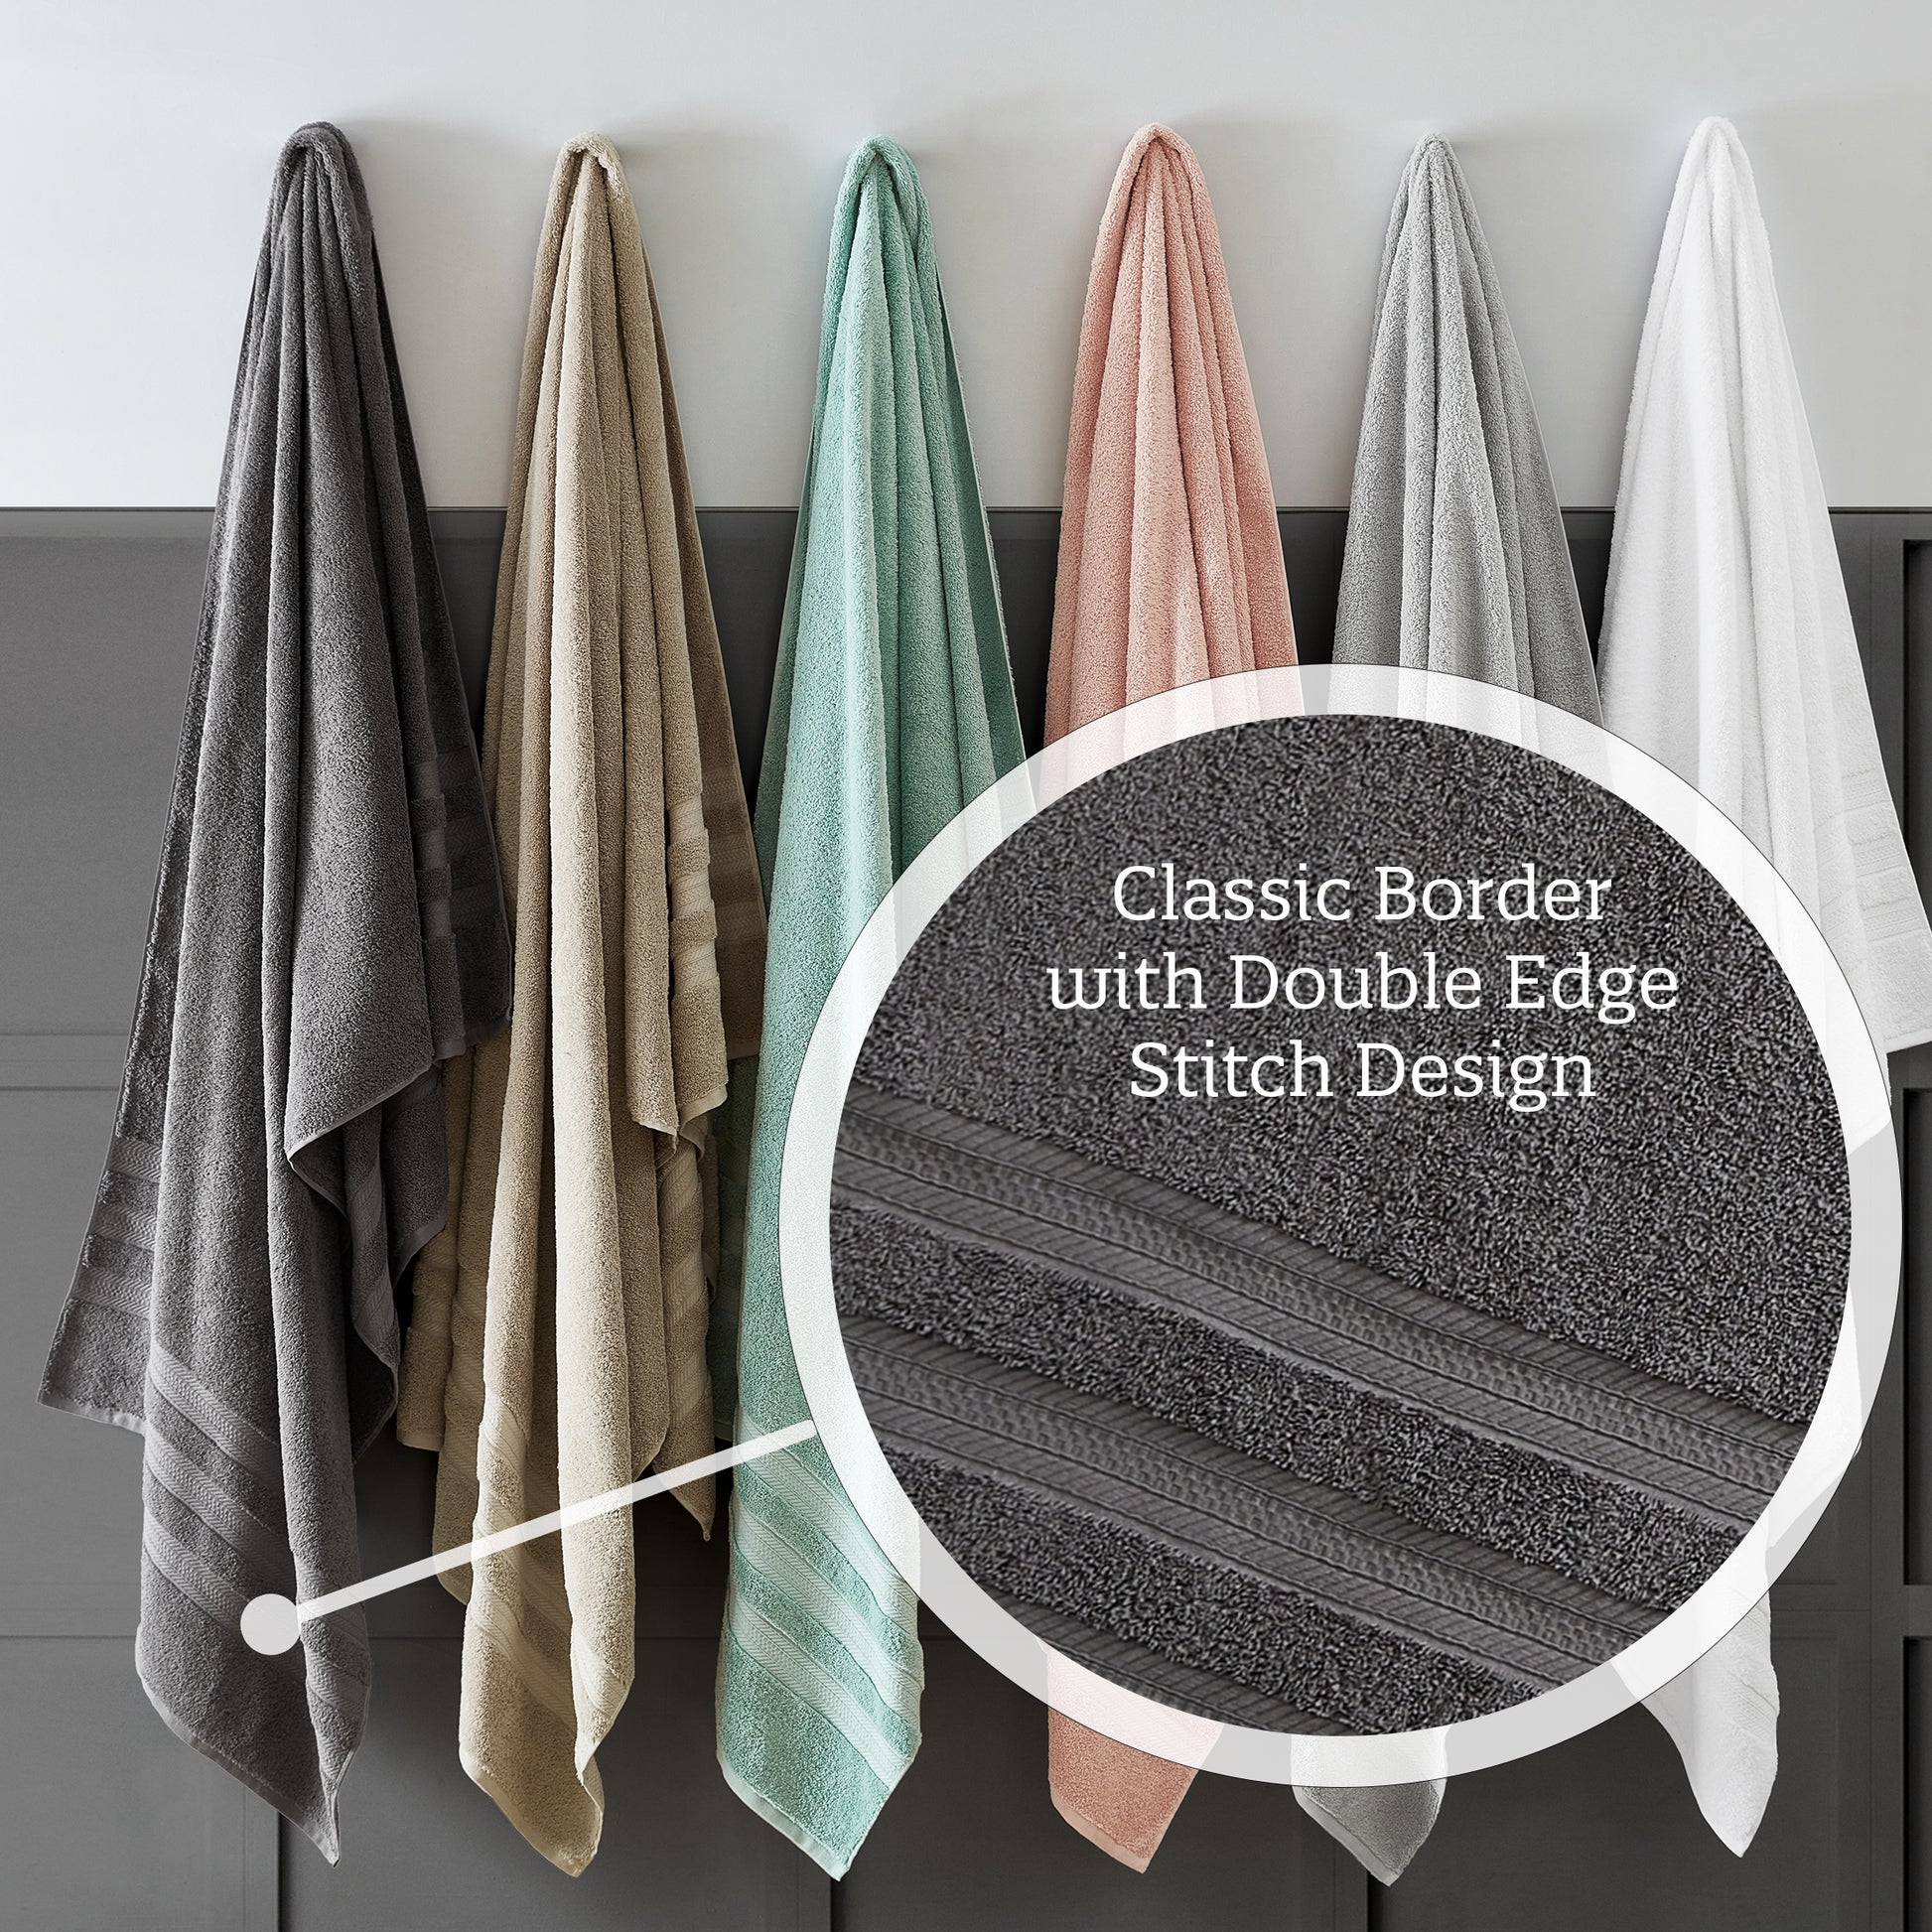 Extra-large, plus-size bath towels are in stock and ready to order